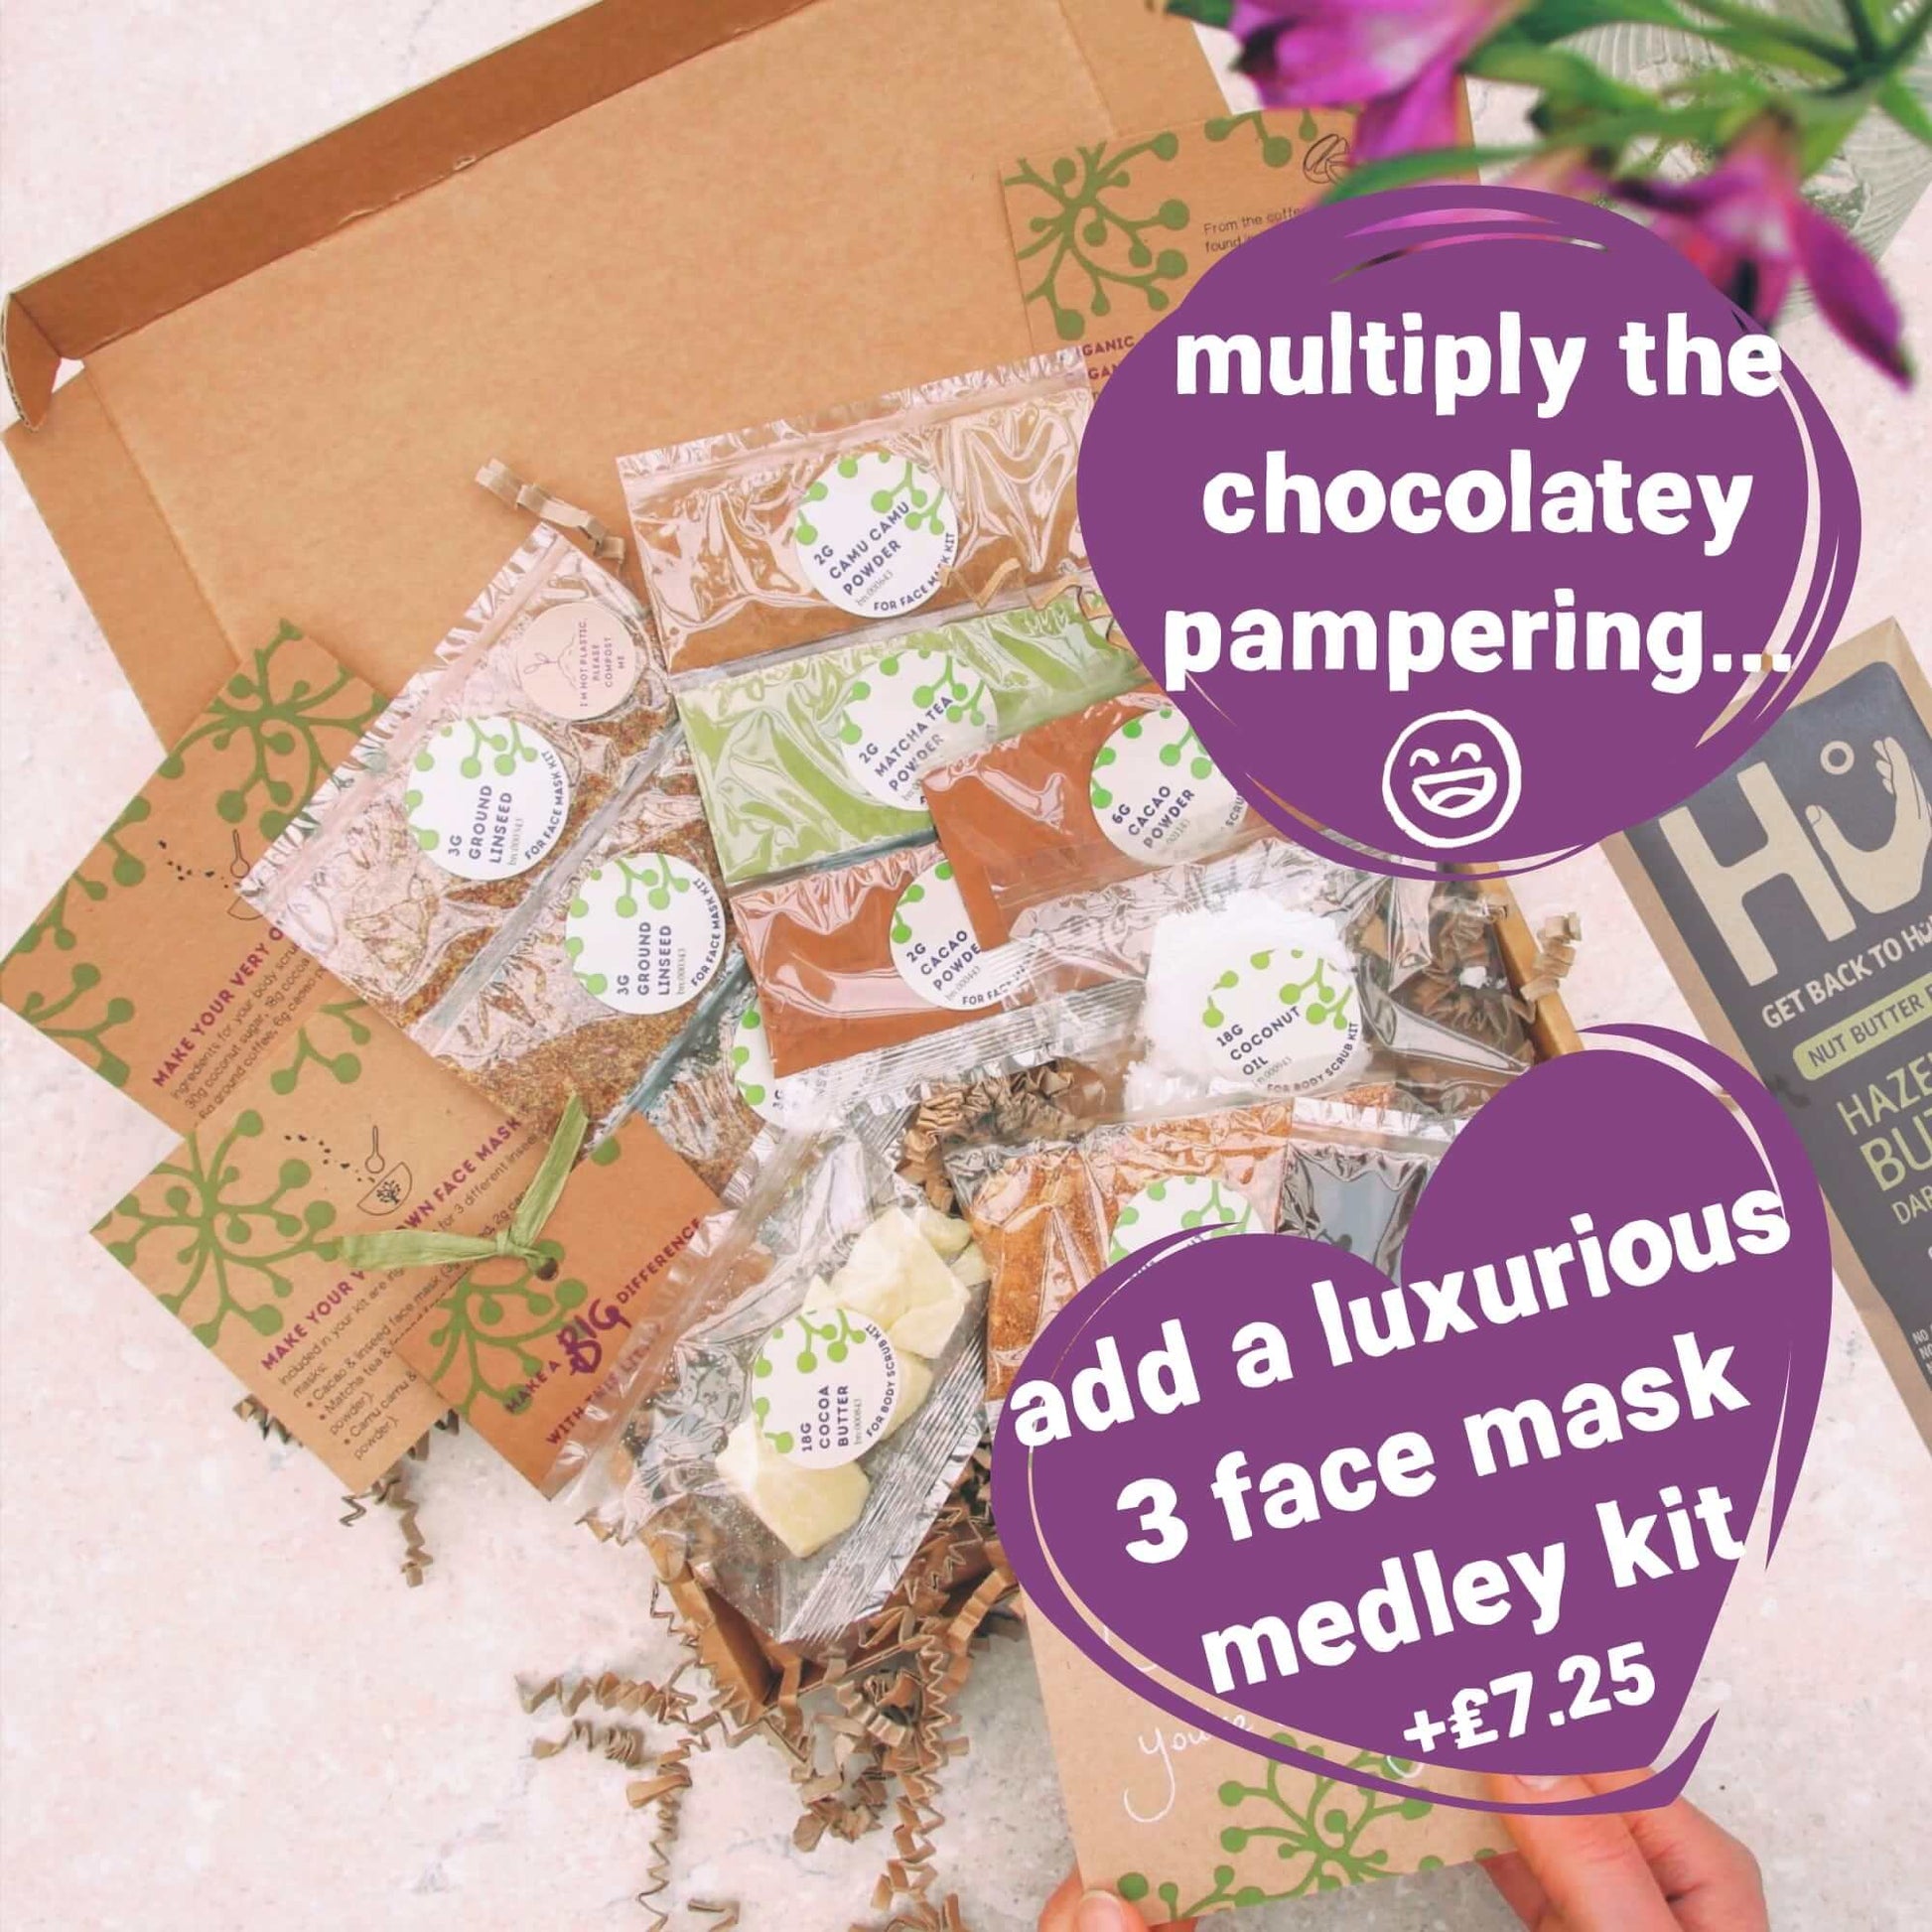 3 luxury eco-friendly face mask kits to add to thoughtful thank you letterbox gift